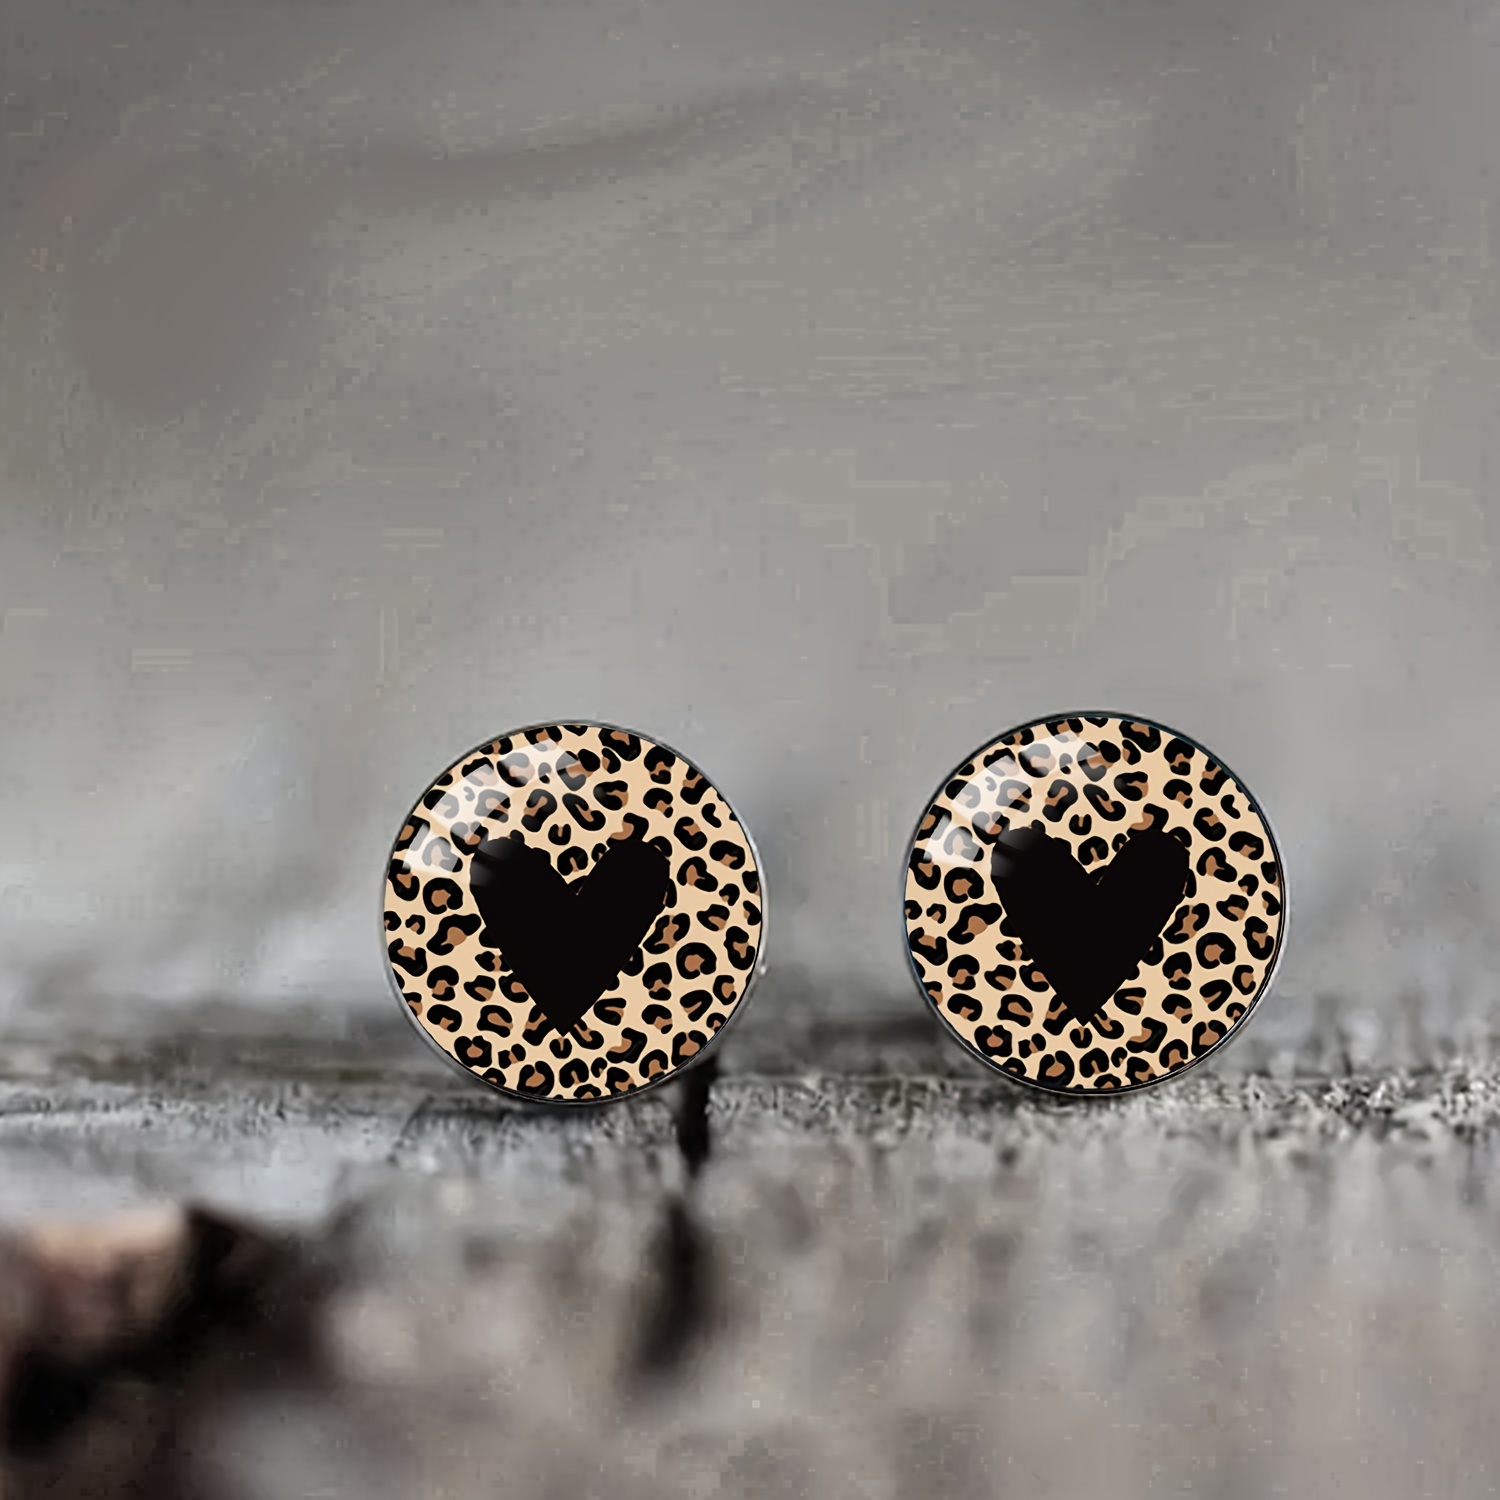 

Elegant Sexy Leopard Print Heart Stud Earrings 1 Pair, Synthetic April Birthstone, Stainless Steel With Glass Inlay, No Plating - Unisex Fashion Jewelry For Party, Vacation, All-season Accessory